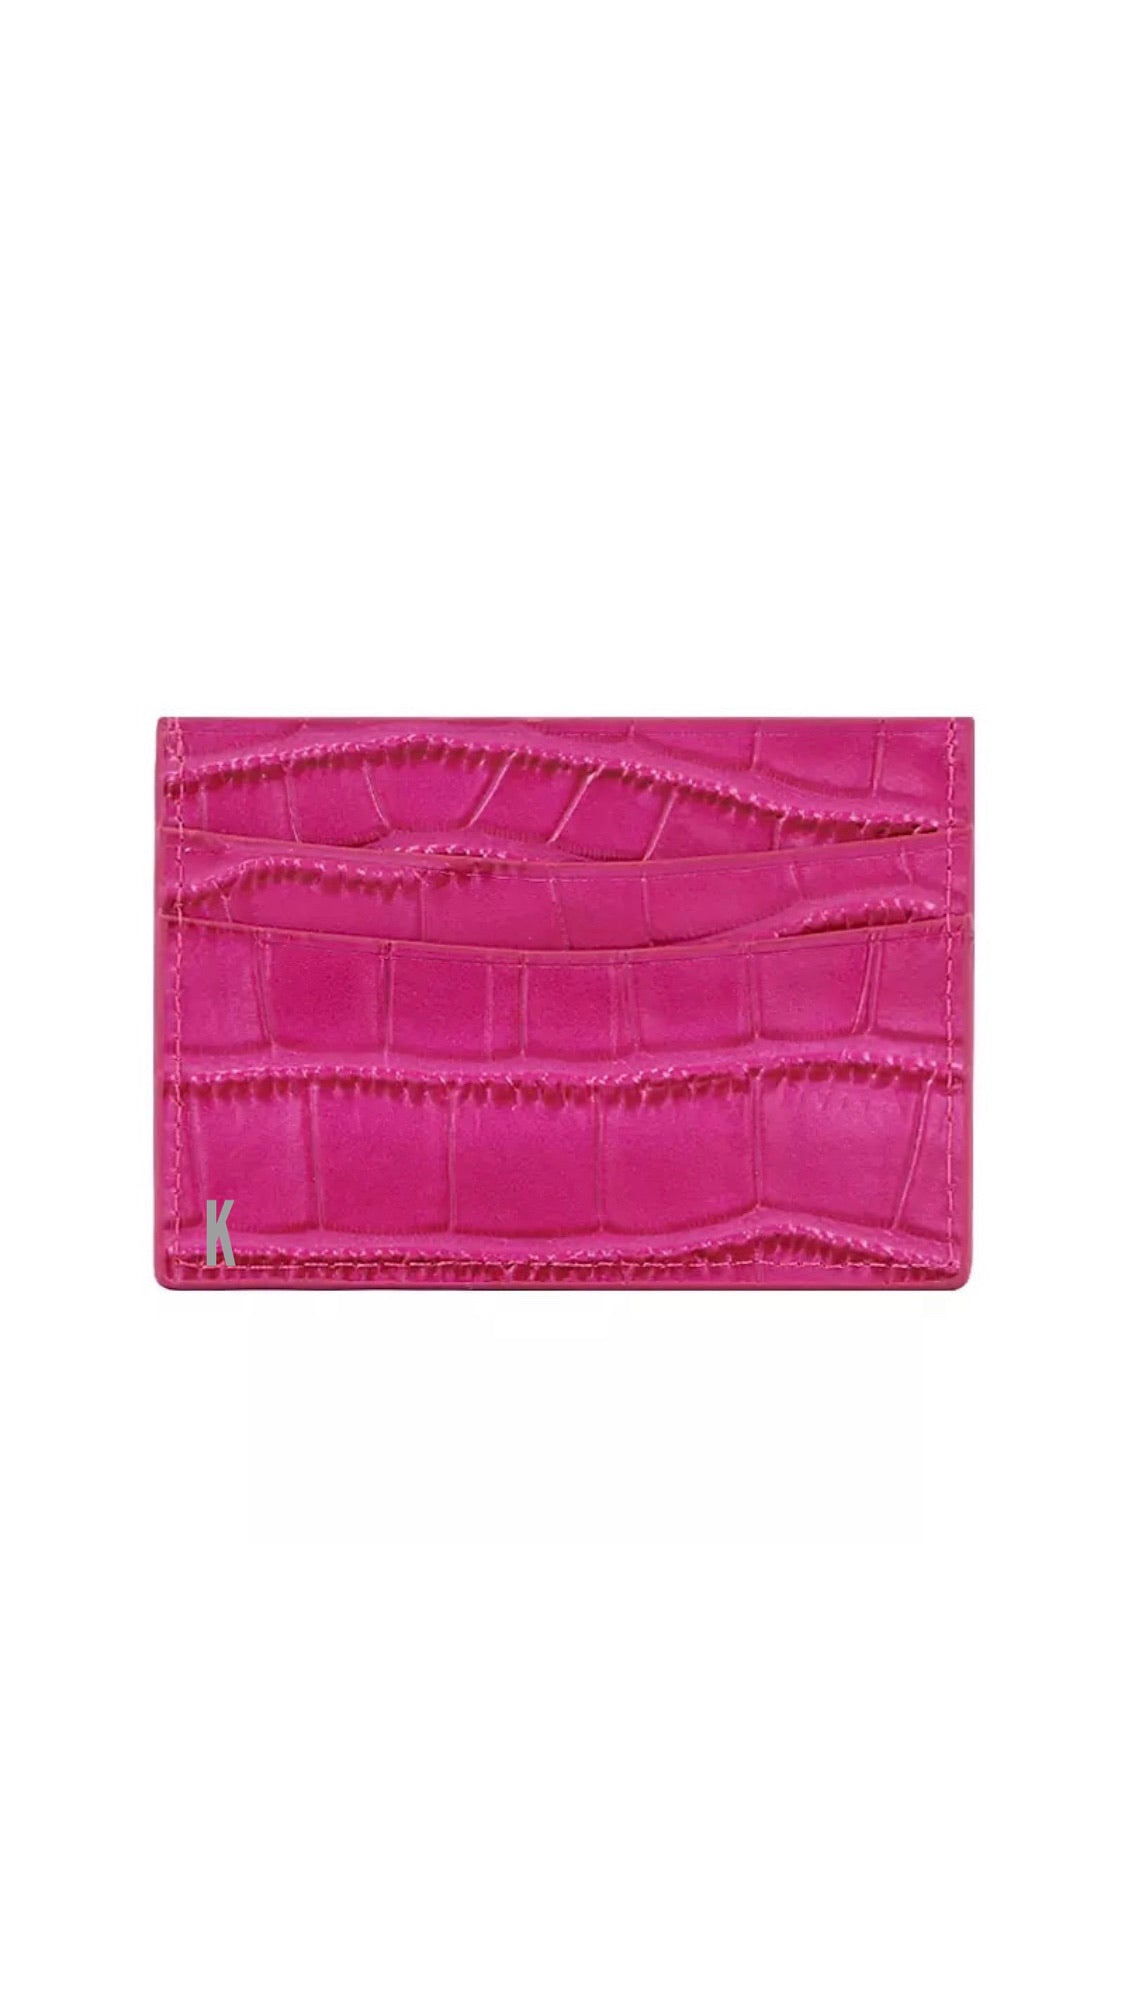 (Made-to-order) Bright Pink Embossed Vegan Leather Card Case